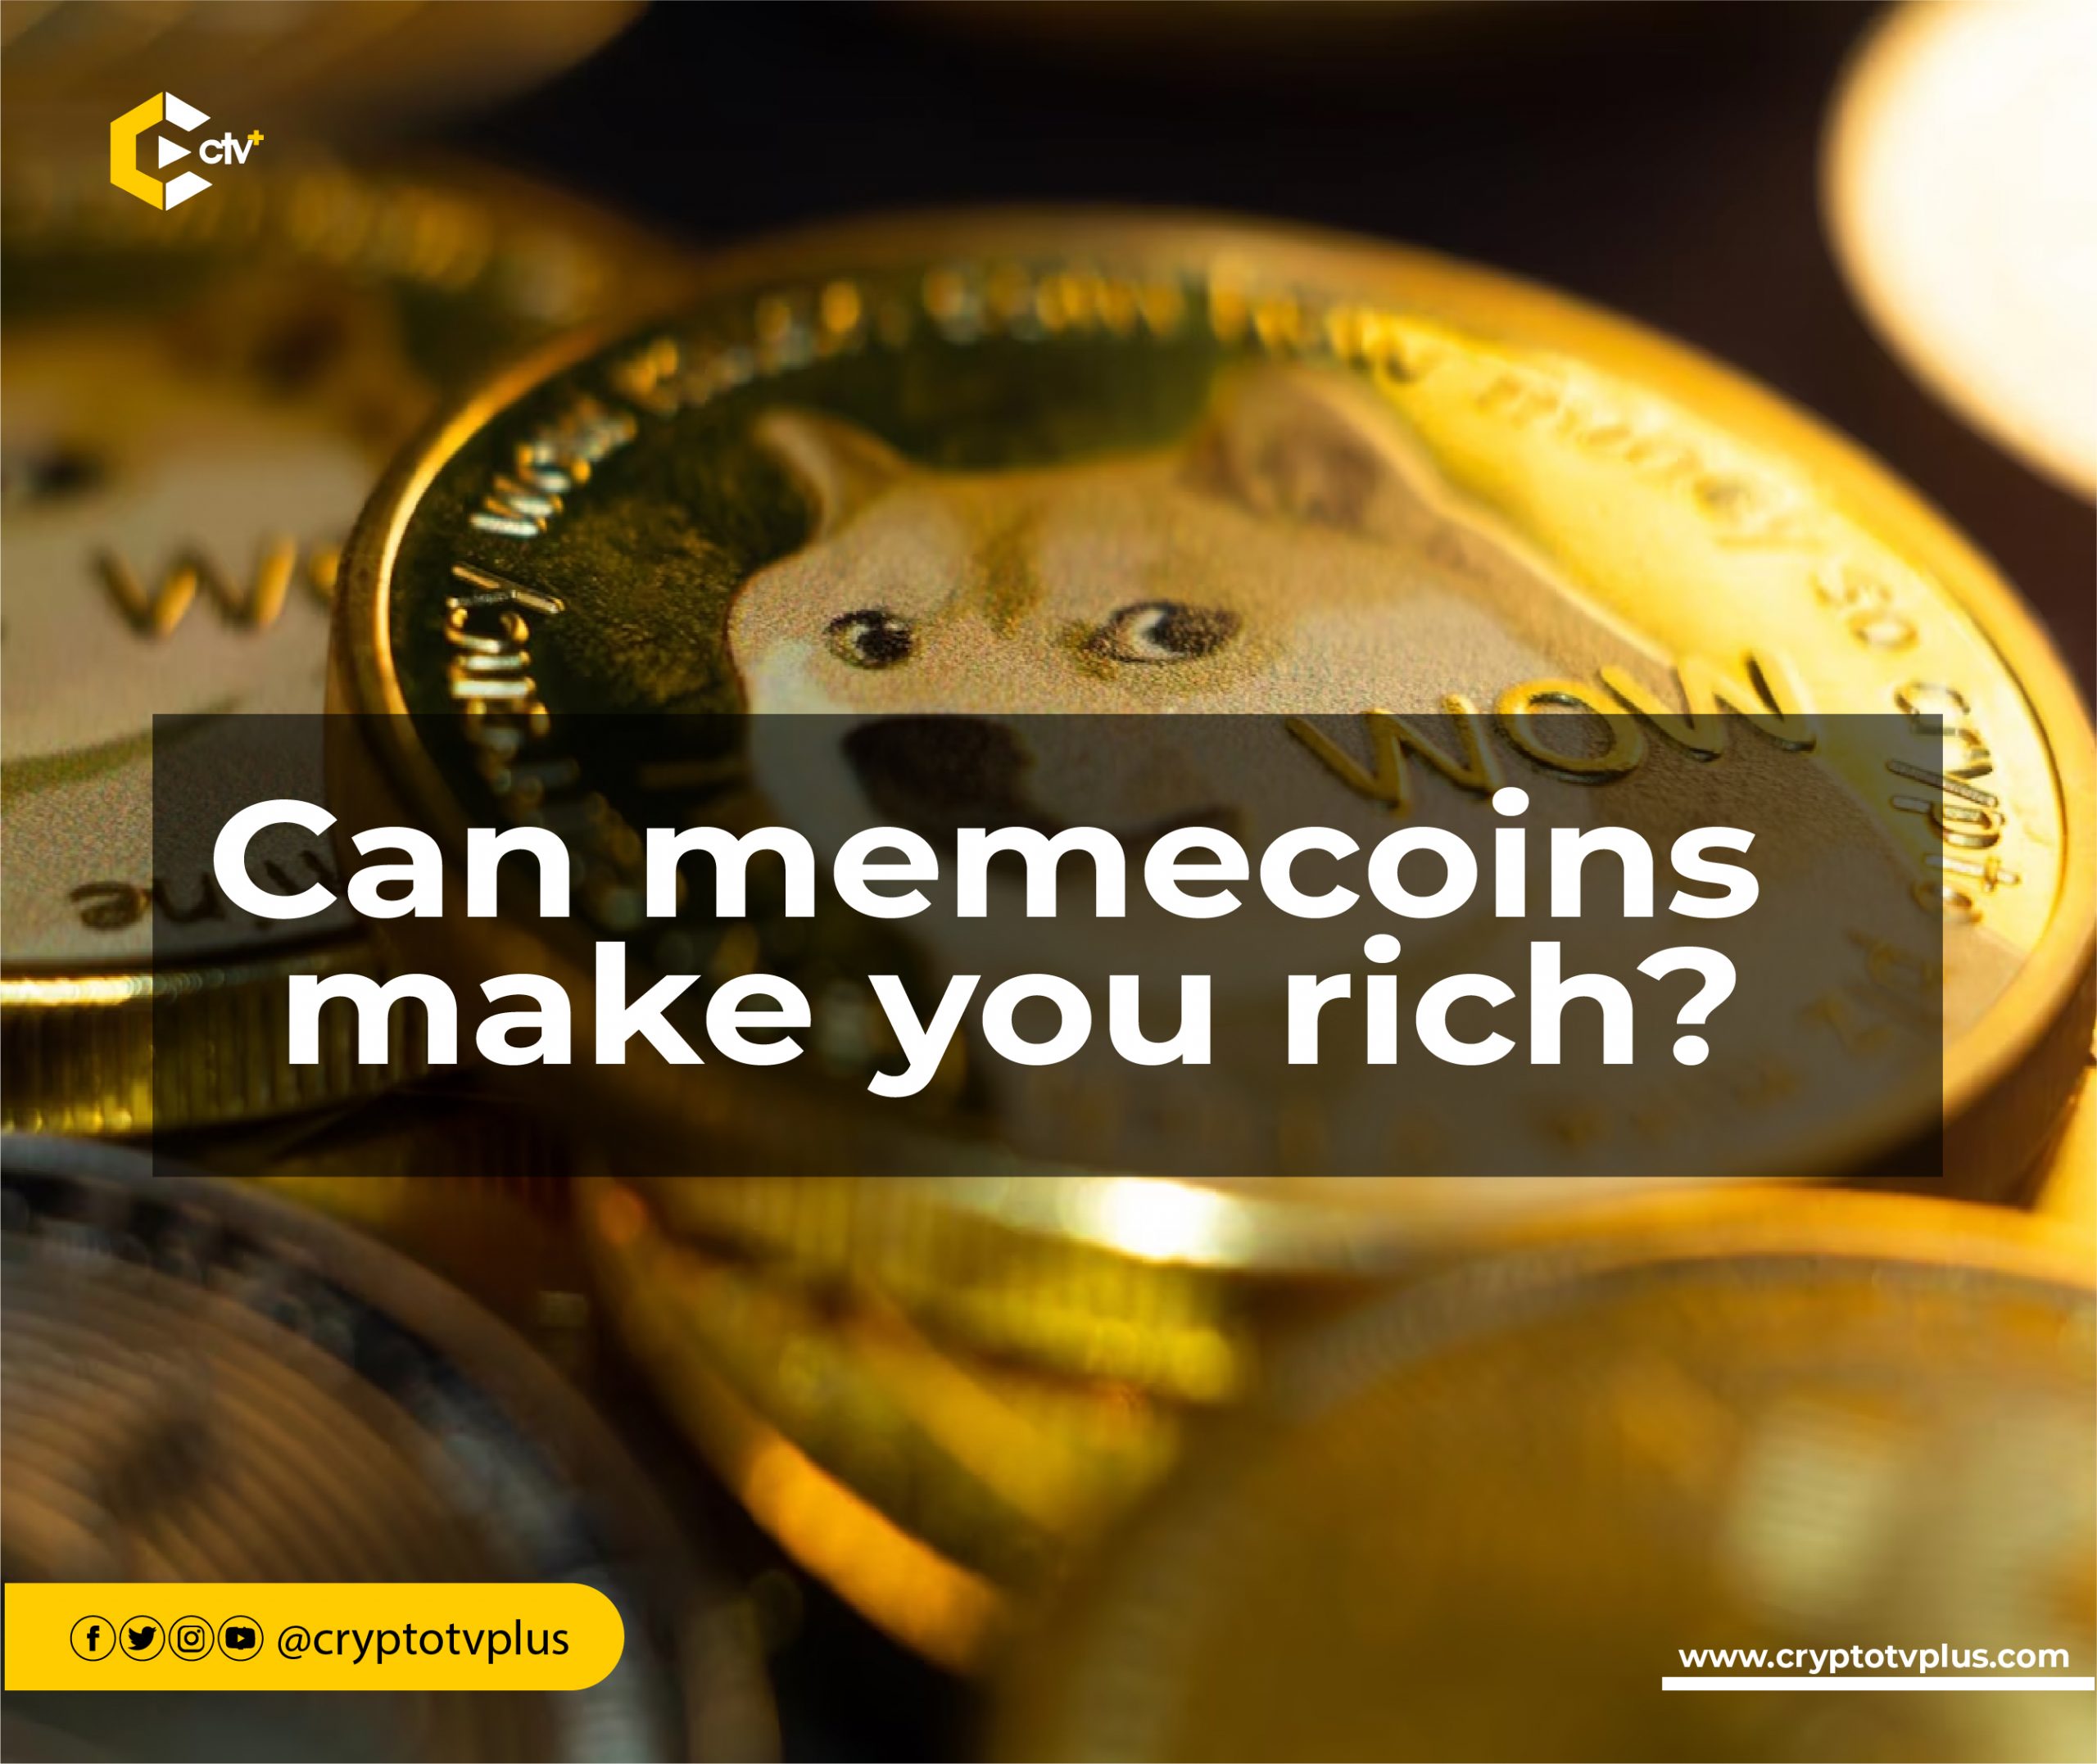 Can Memecoins Make You Rich?  CryptoTvplus - The Leading